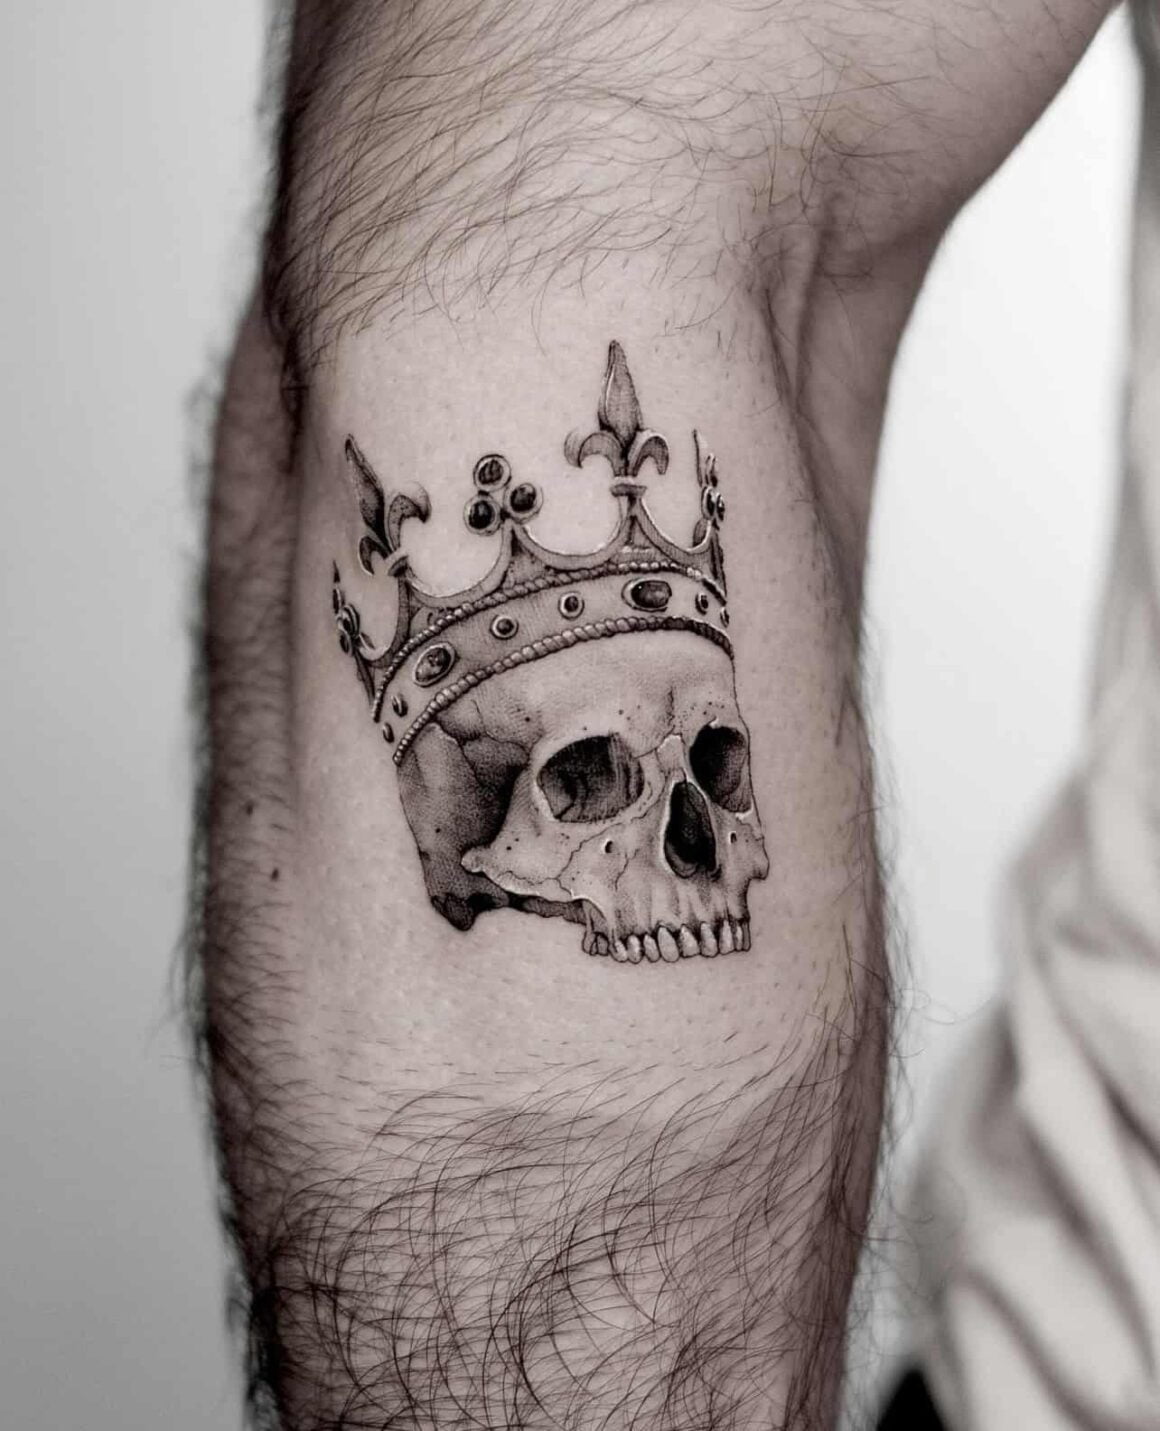 Aggregate 174+ crown tattoo images latest